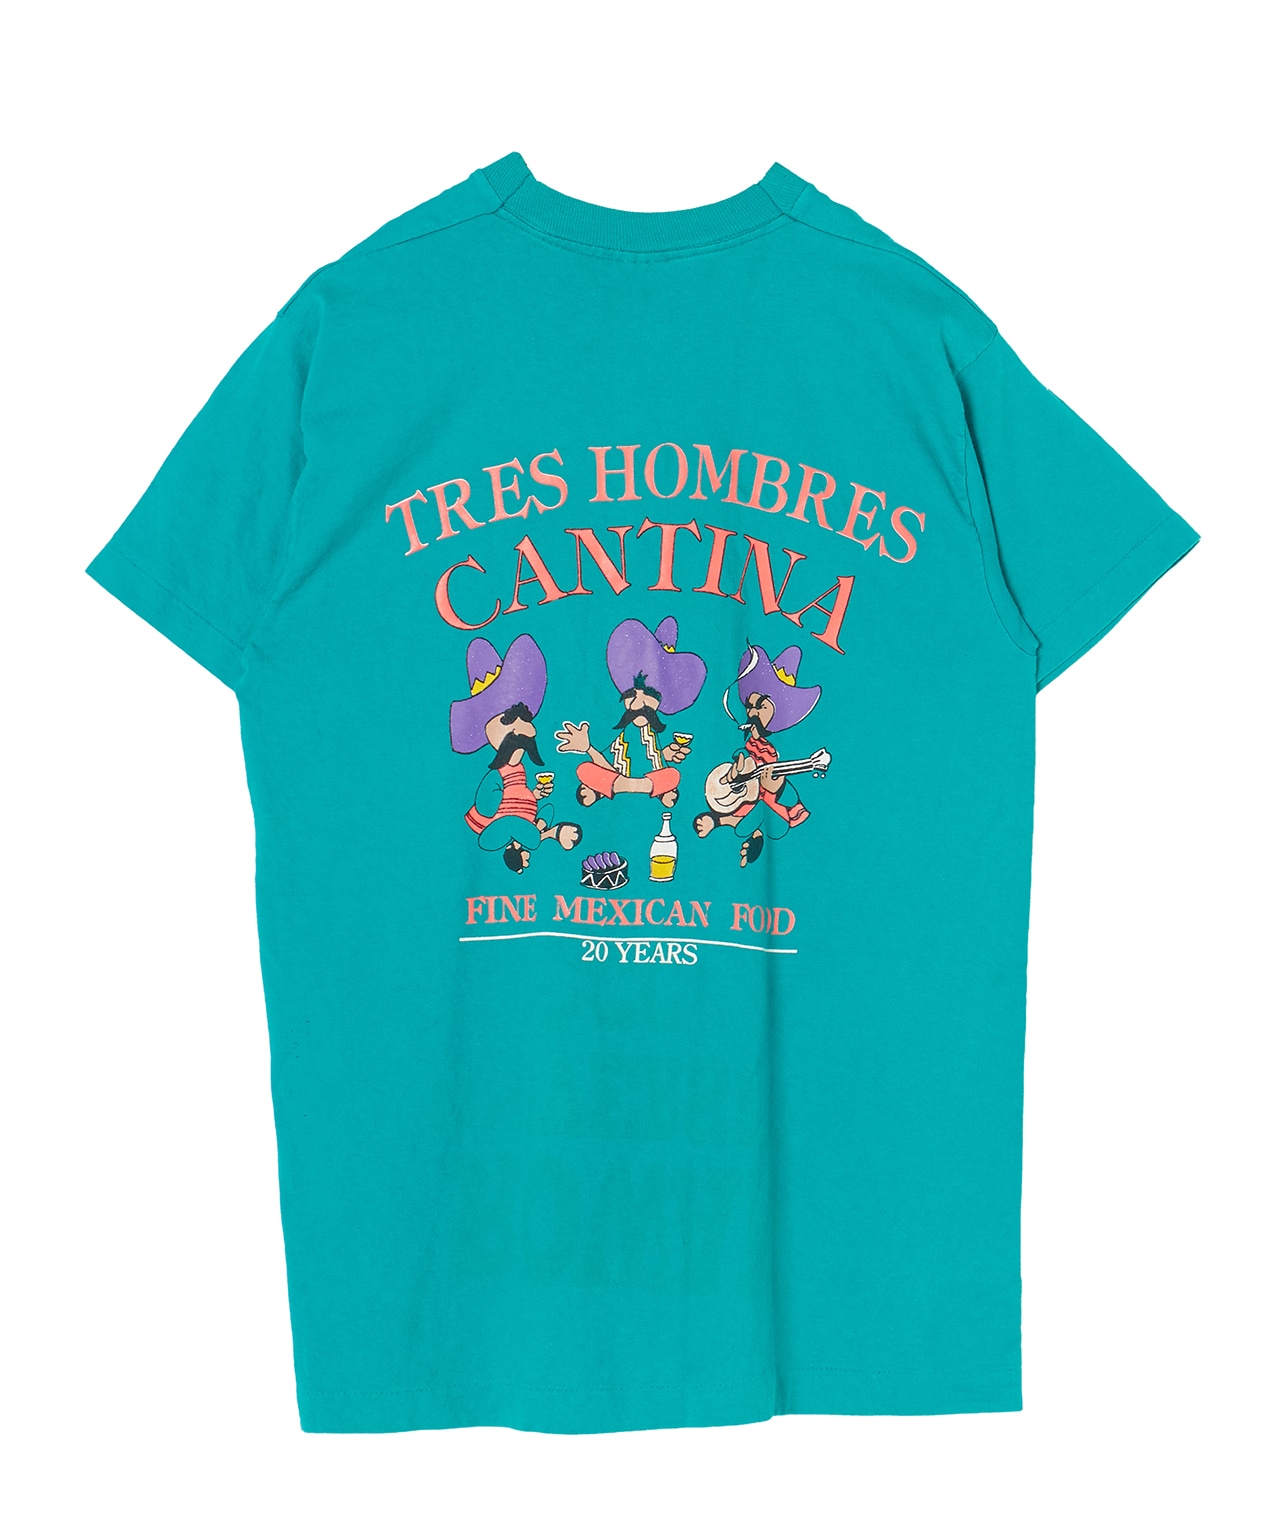 USED/CANTINA TRES HOMBRES FINE MEXICAN FOOD/プリントTシャツ 詳細画像 GREEN 2